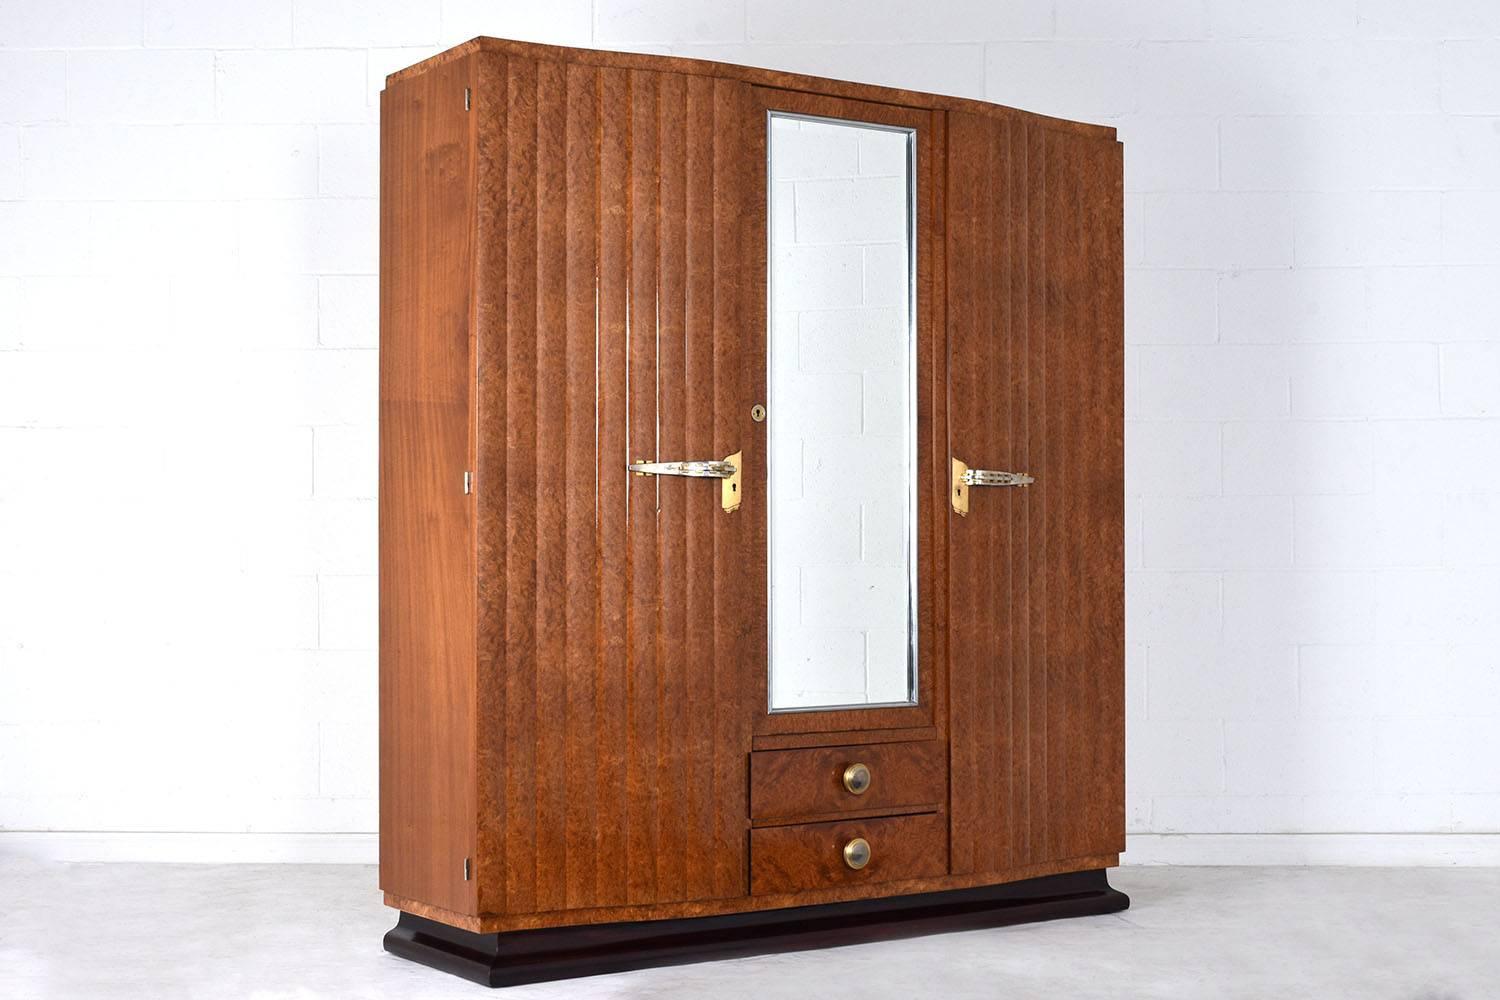 This 1930s French Art Deco-style armoire is covered in burled walnut veneers in the original light walnut color stain finish. There are two cabinet doors that have decorative wave details and brass door handles. The centre door features a mirror